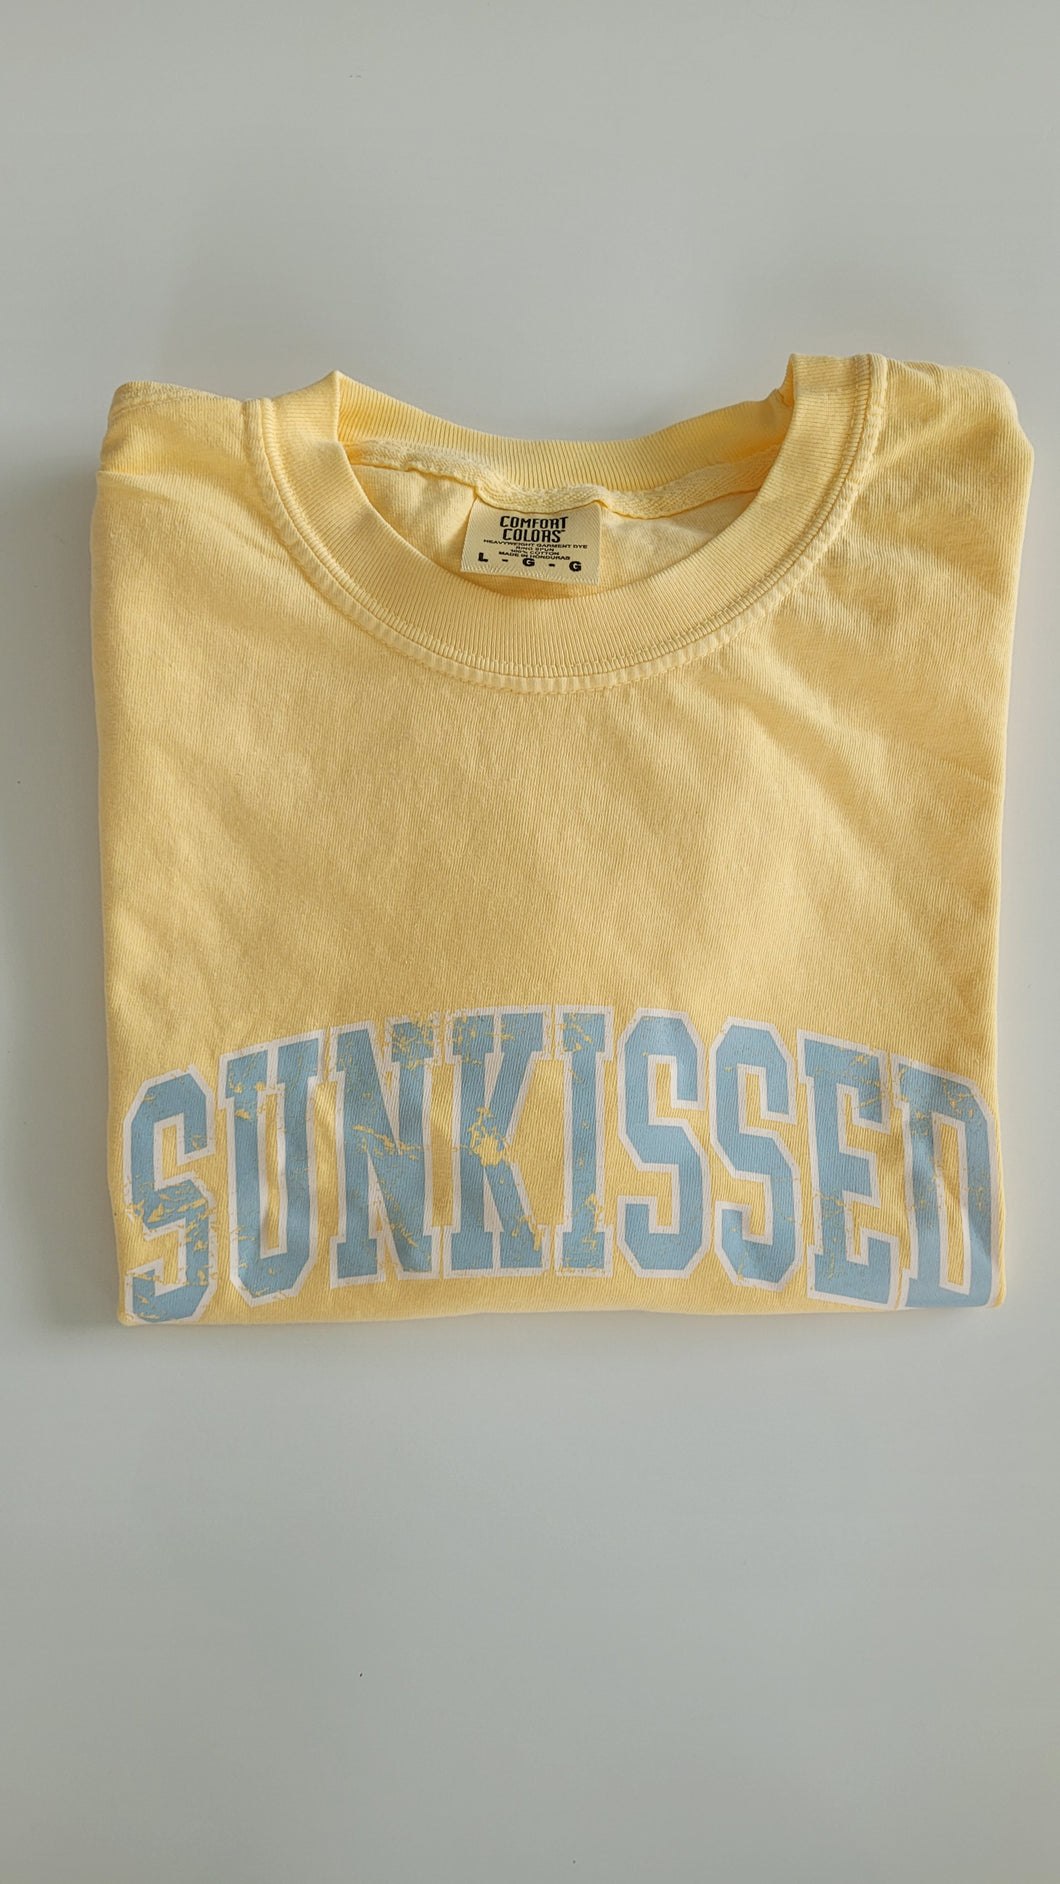 Sunkissed t-shirt